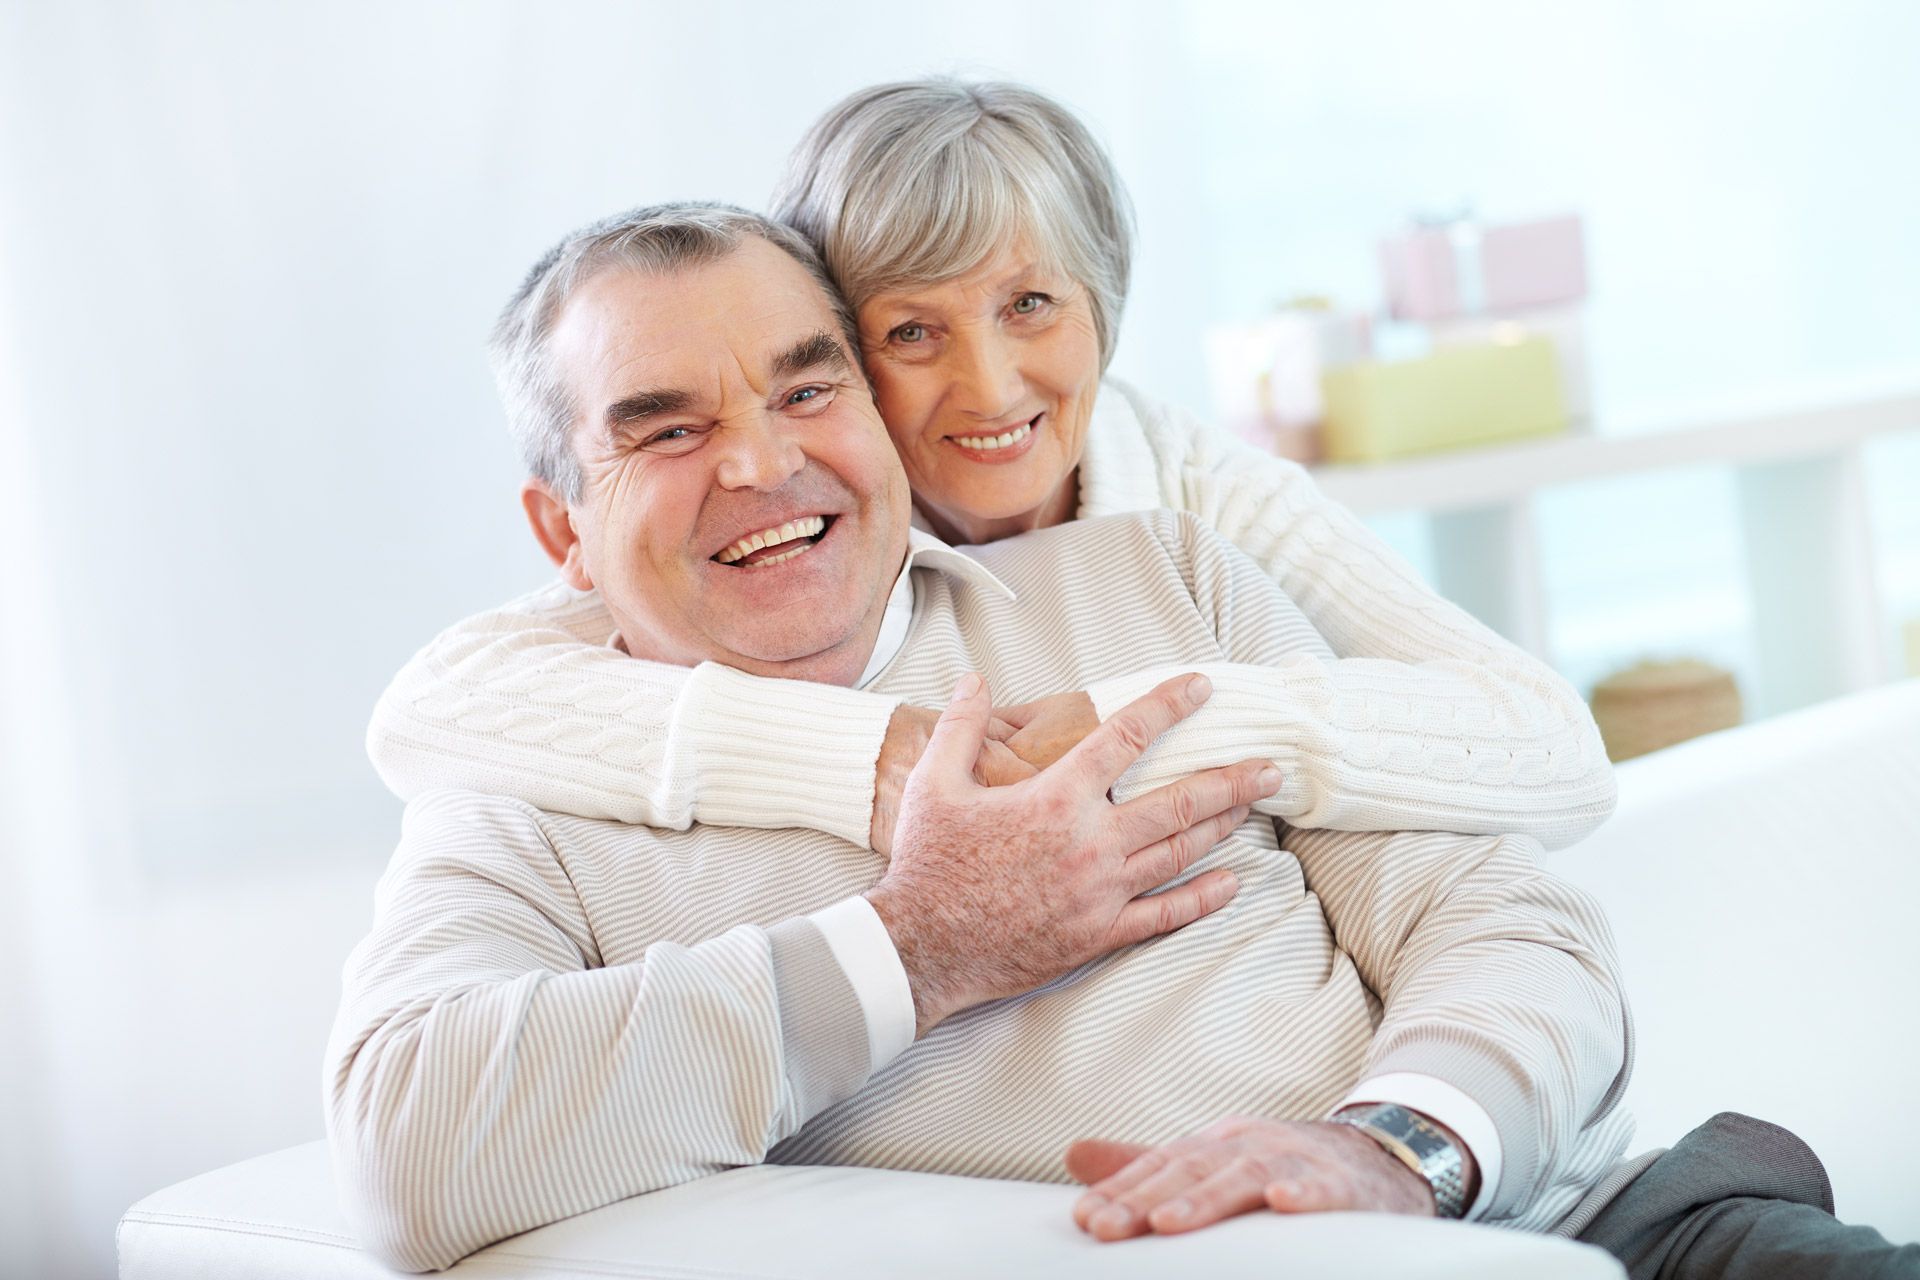 An elderly couple is sitting on a couch and hugging each other.